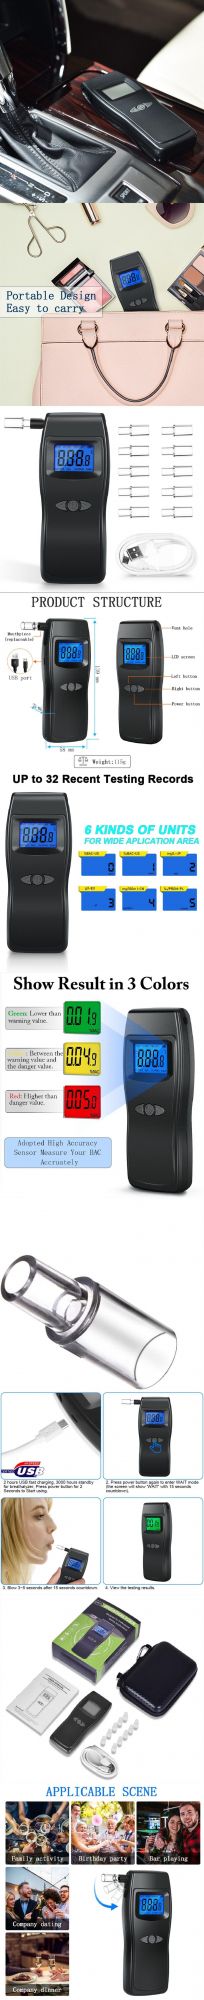 Alcohol Tester with Mouthpiece Breathalyzer Alcohol Breath Meter